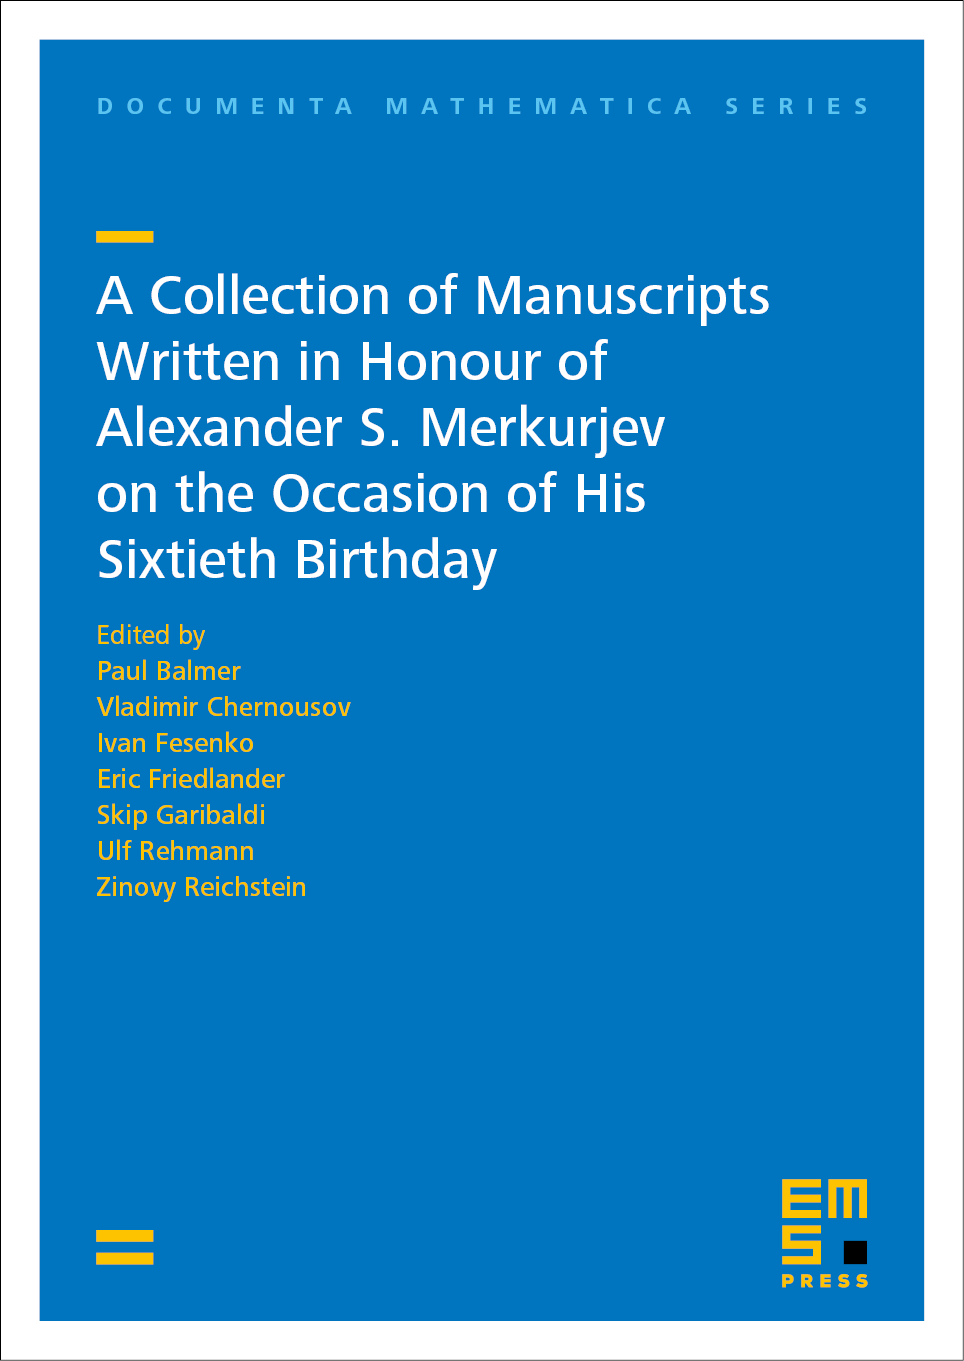 A Collection of Manuscripts Written in Honour of Alexander S. Merkurjev on the Occasion of His Sixtieth Birthday cover